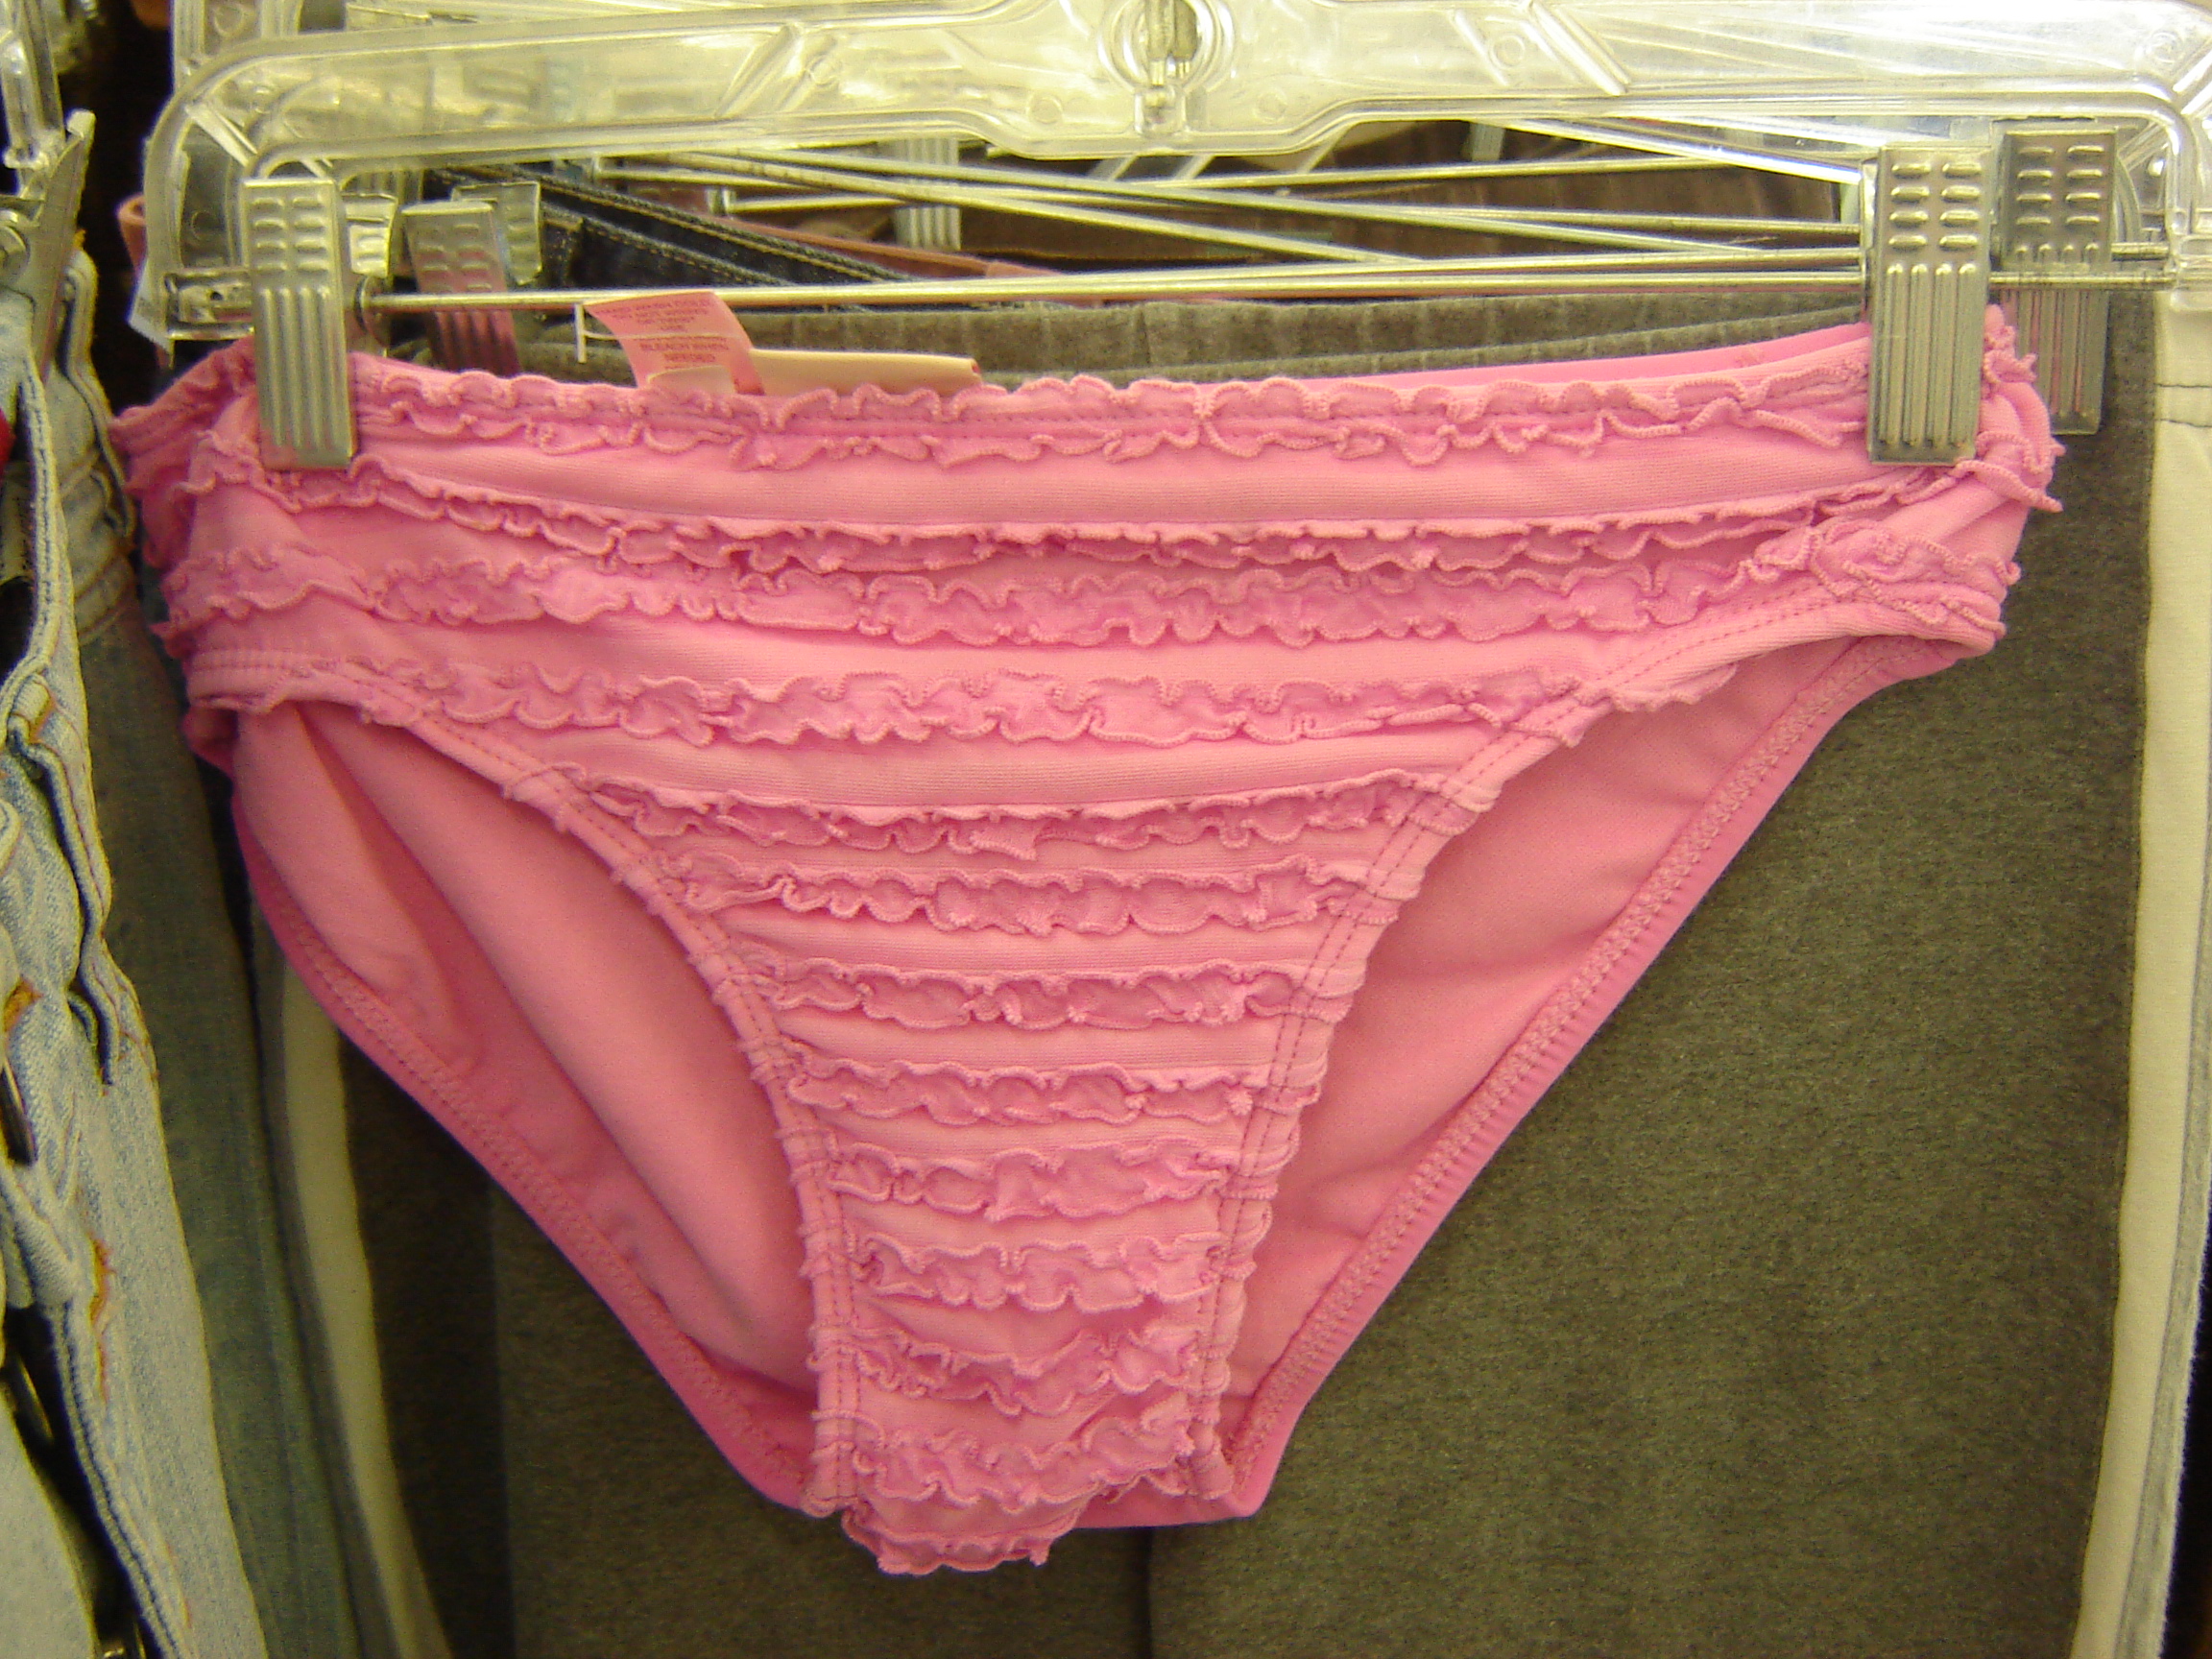 Please fill pink panties your fan image